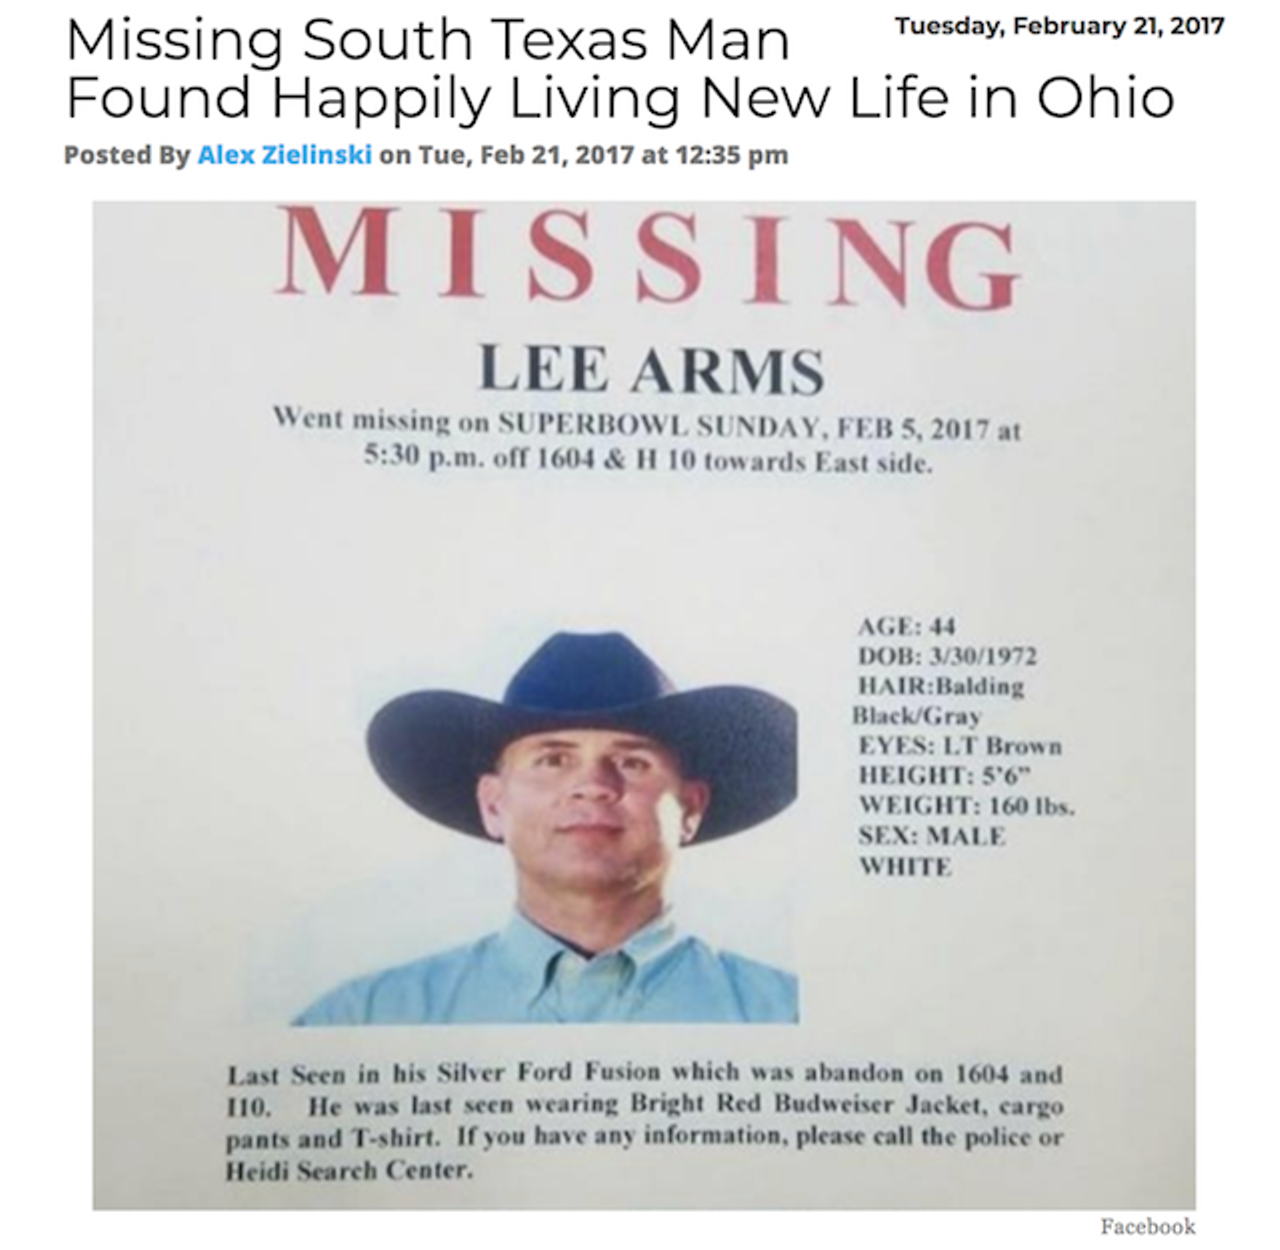 A South Texas man chose to pursue a new life with a new partner in Ohio without telling his wife or children where he was heading, leading police and family to launch a massive search. Probably would’ve been easier if he just left a note. Read more.